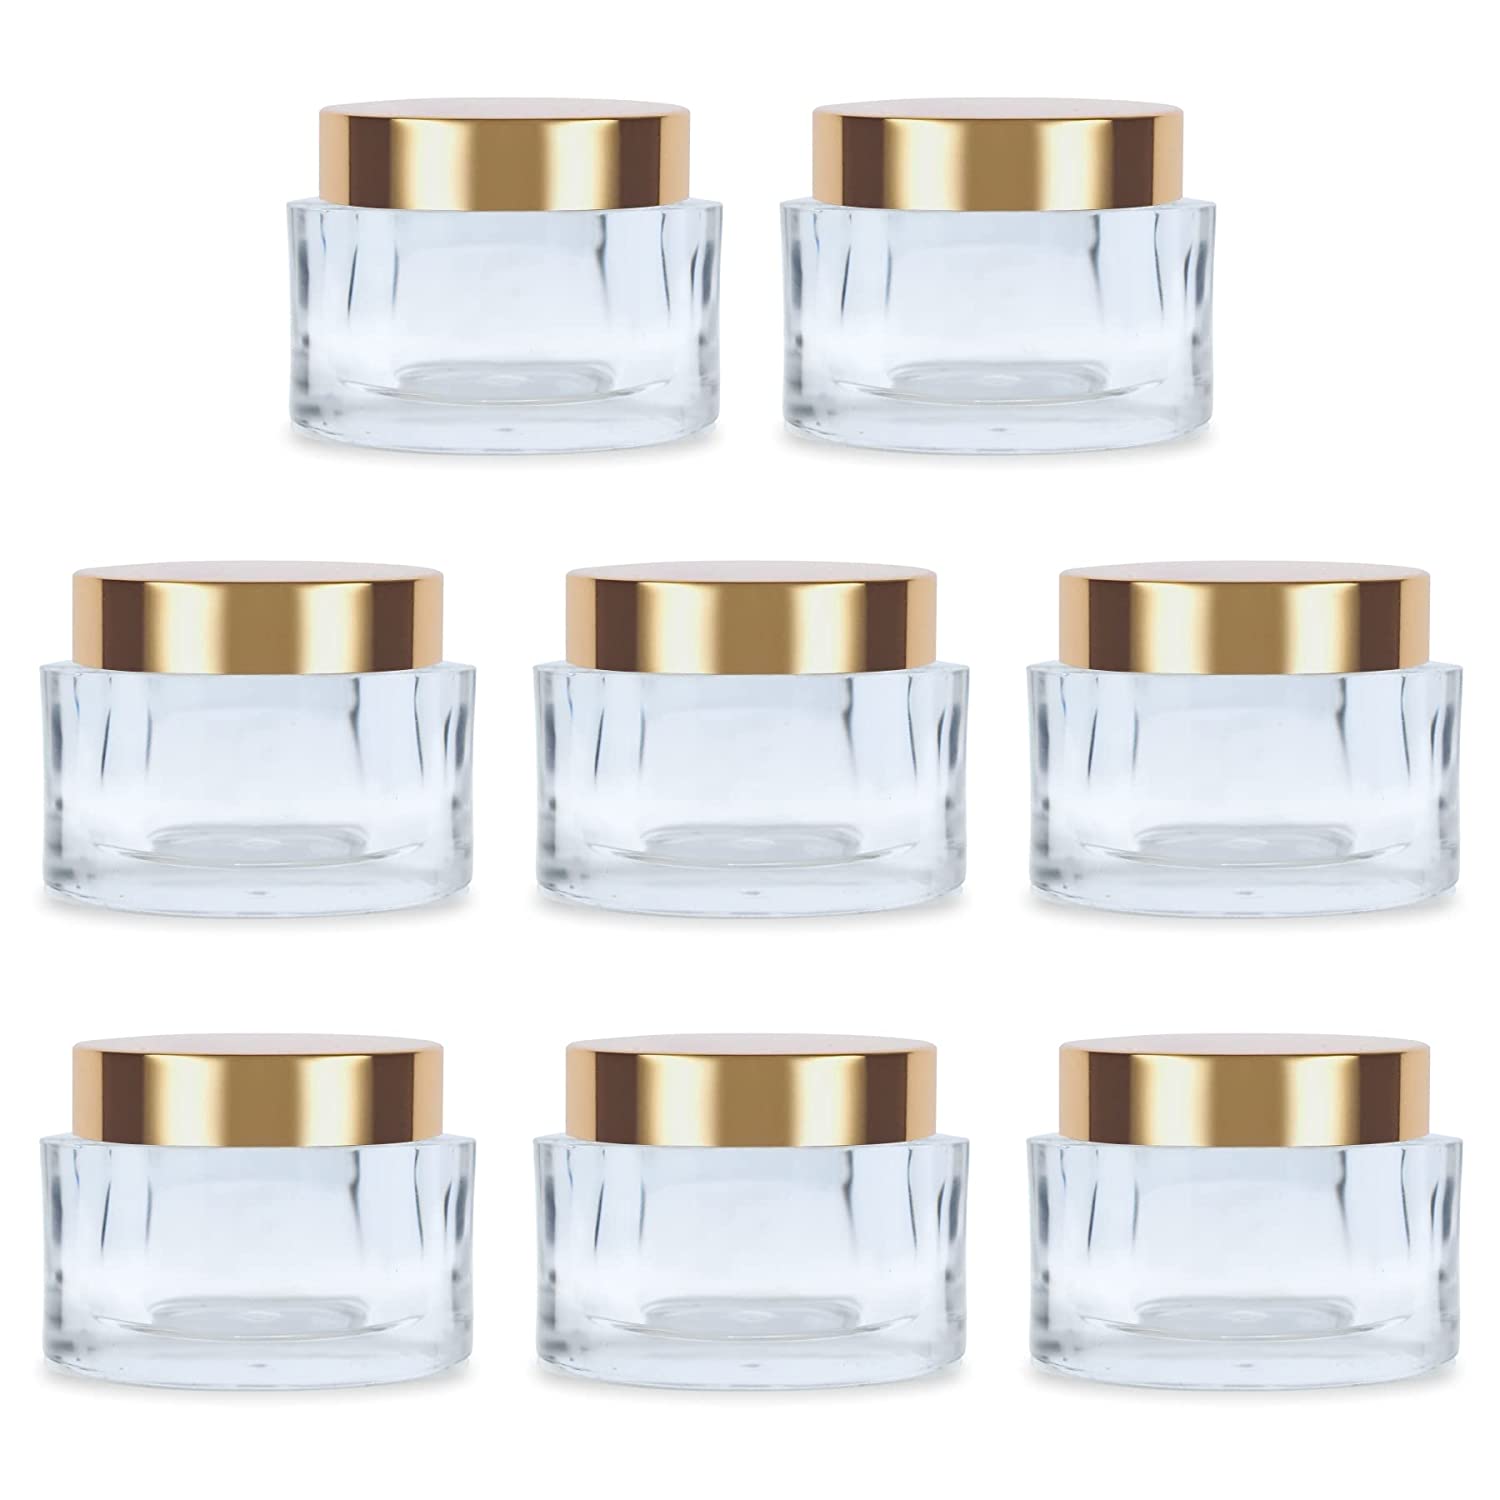 Shoprythm Cosmetic Jar Pack of 8 Empty Transparent Oval Acrylic San Jars with Golden Caps